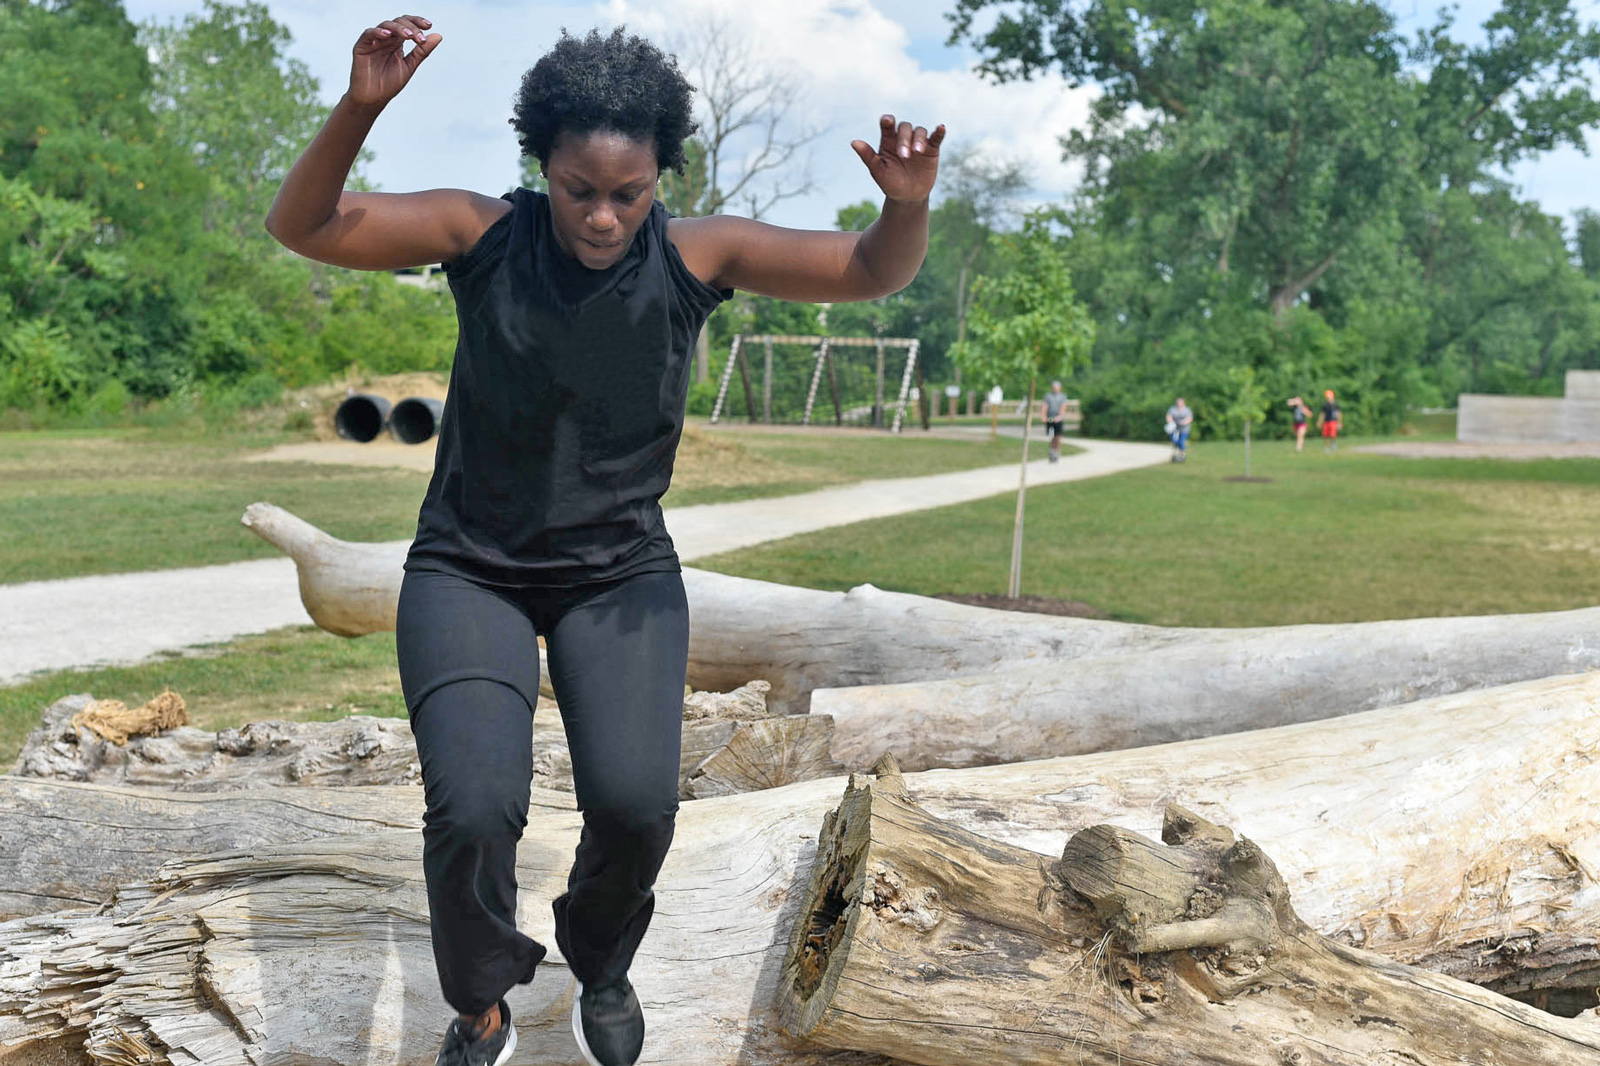 Woman on the log run on the obstacle course at Scioto Audubon Metro Park.